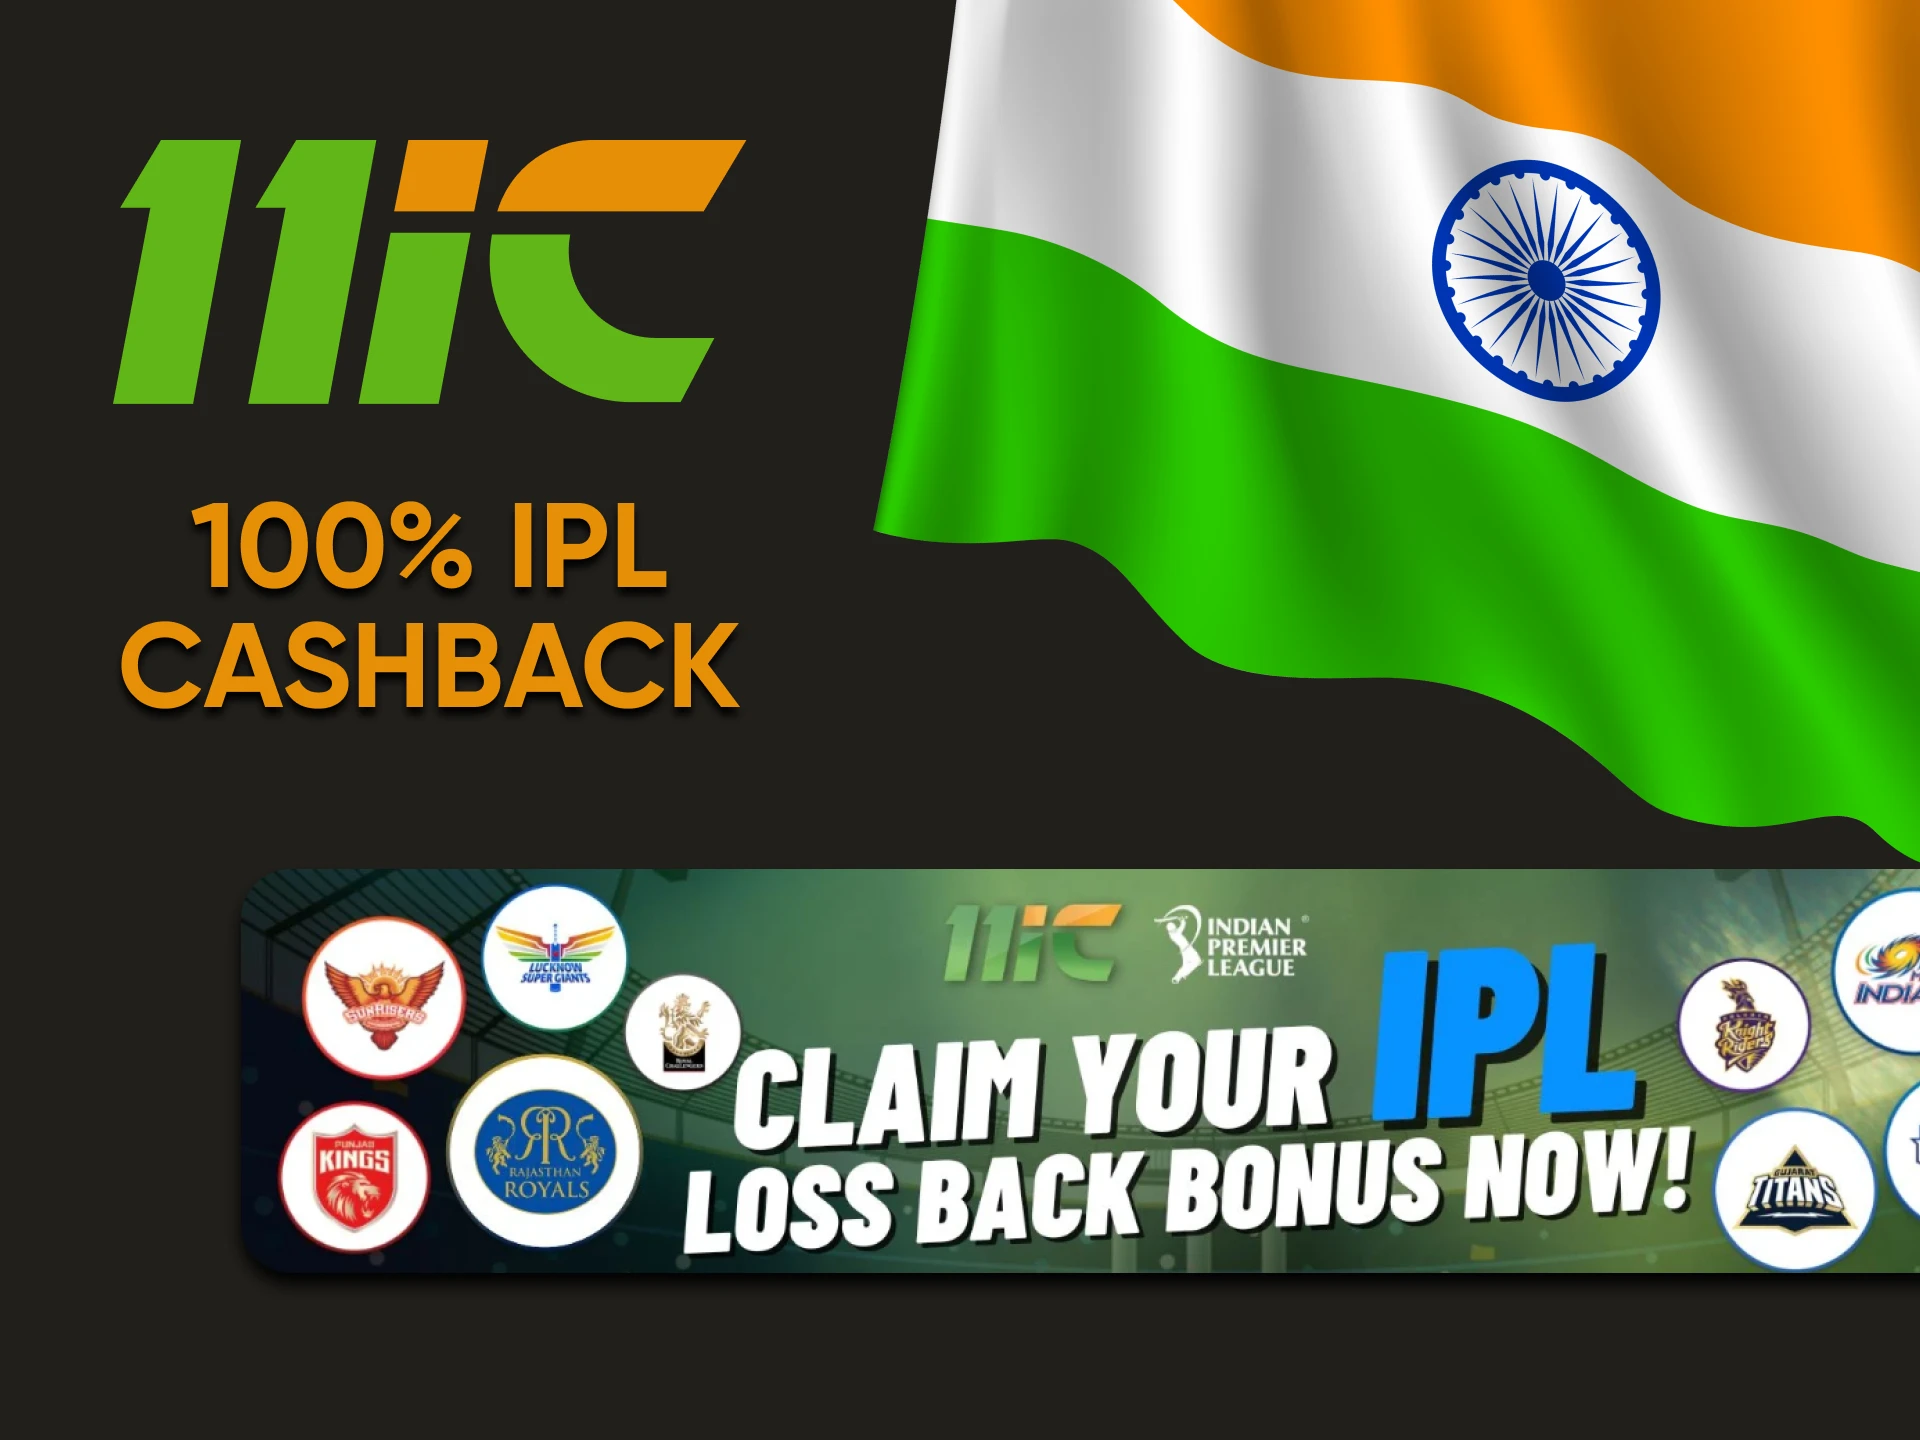 When you bet on IPL you get cashback from 11ic.